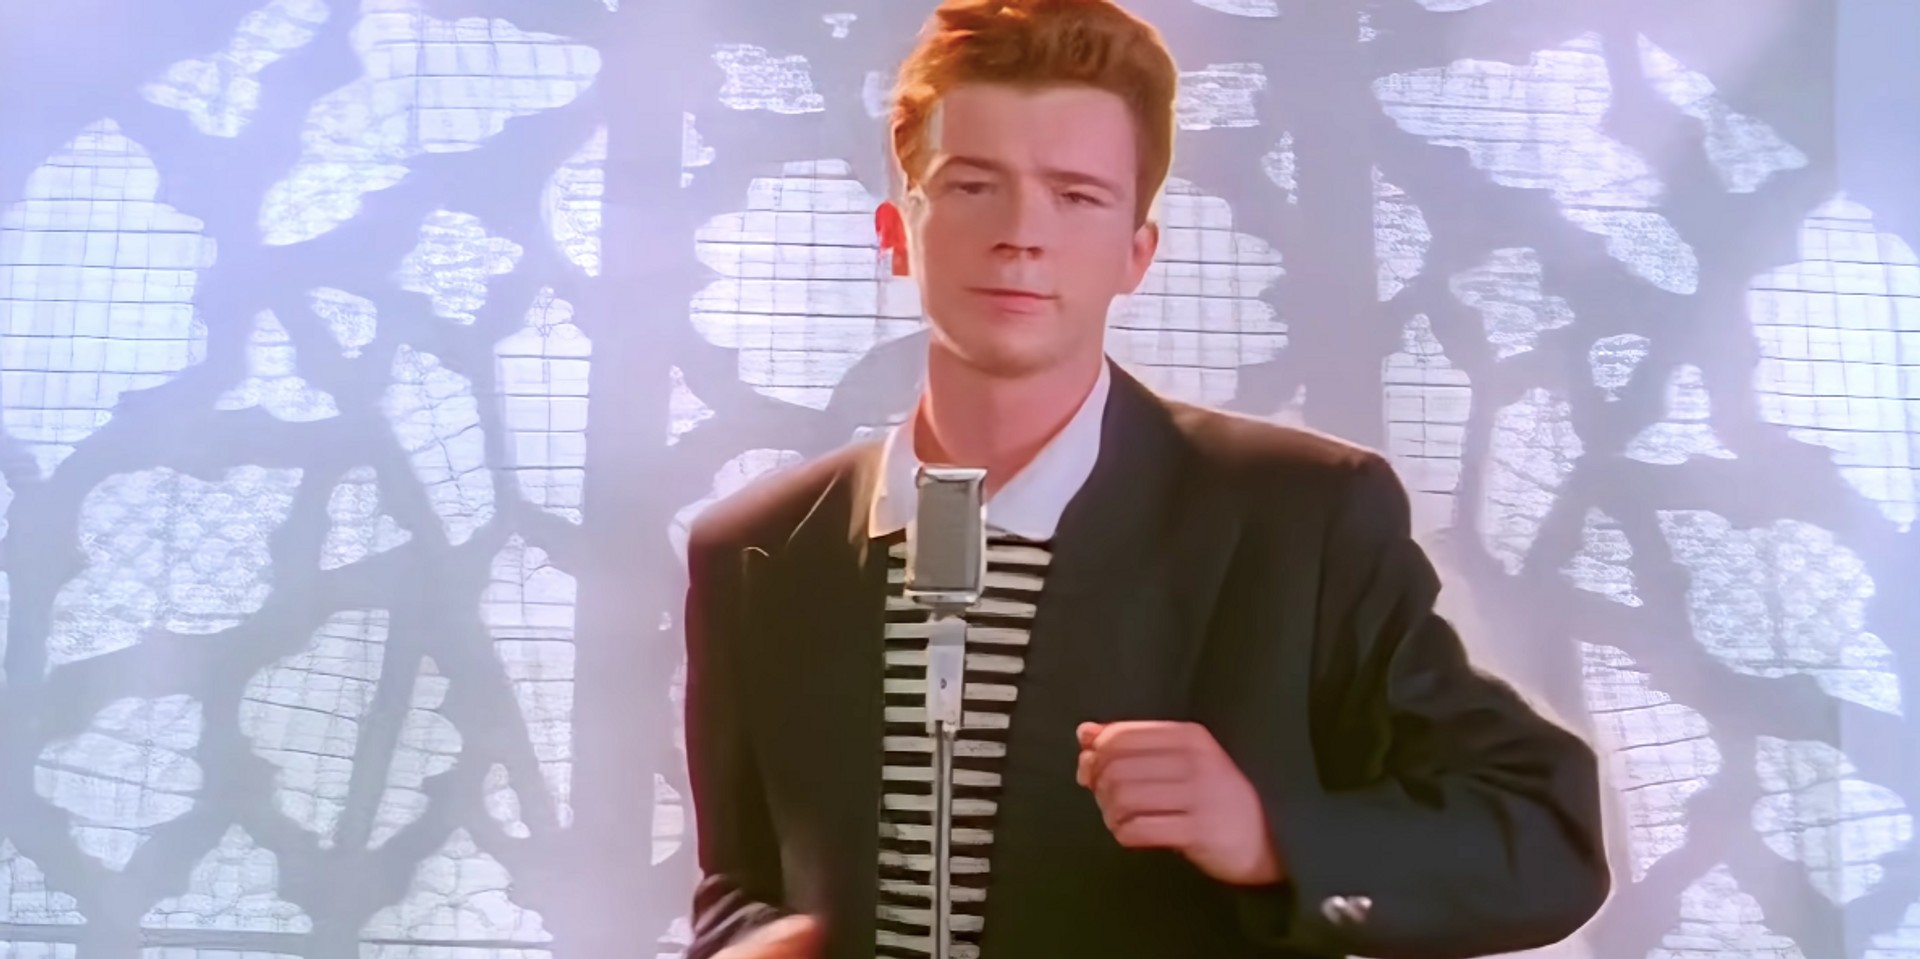 Rickroll in 4K with a remastered music video for Rick Astley's 'Never Gonna Give You Up'